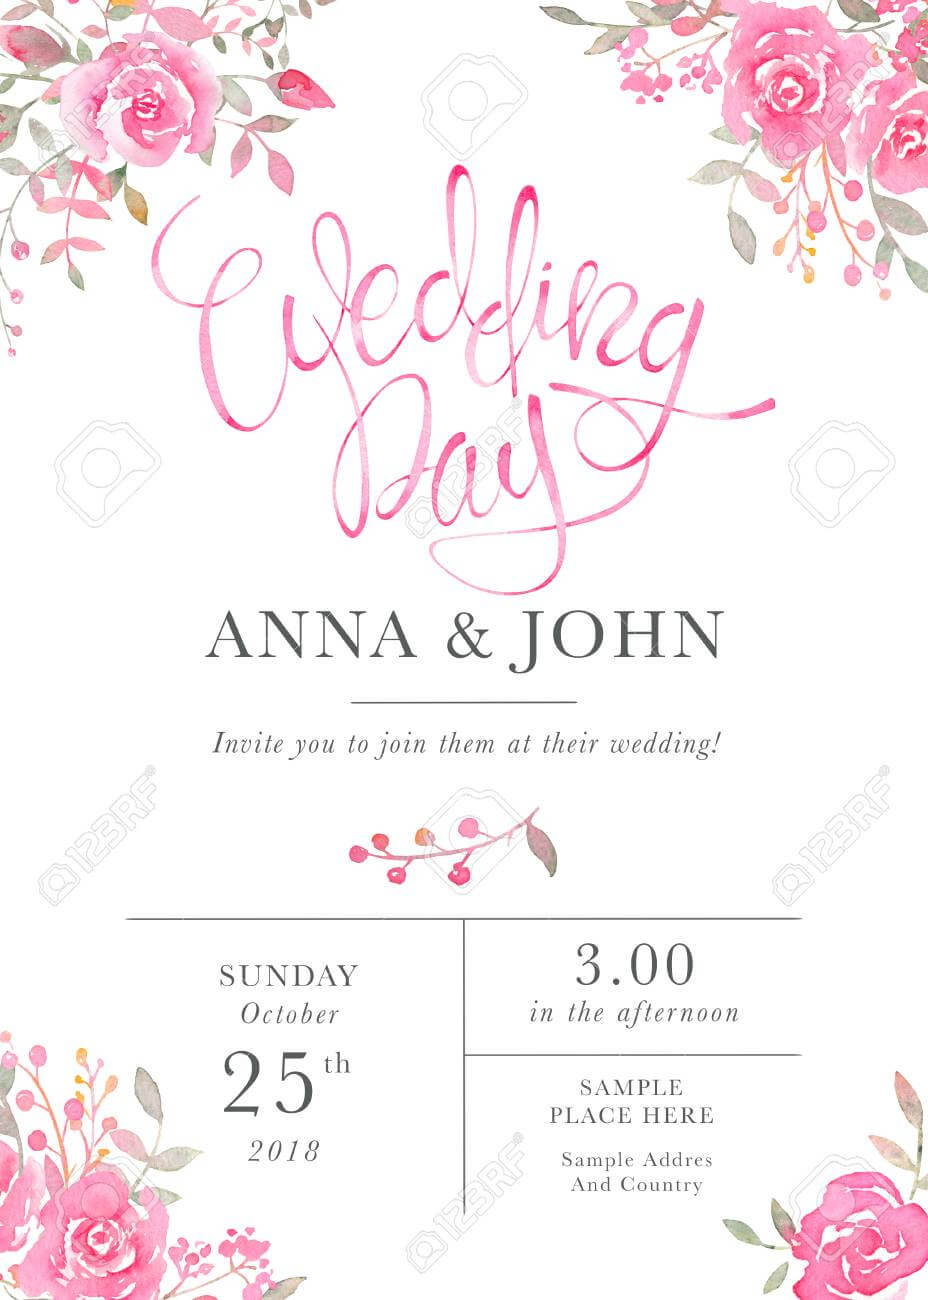 Wedding Invitation Card Template With Watercolor Rose Flowers With Free E Wedding Invitation Card Templates